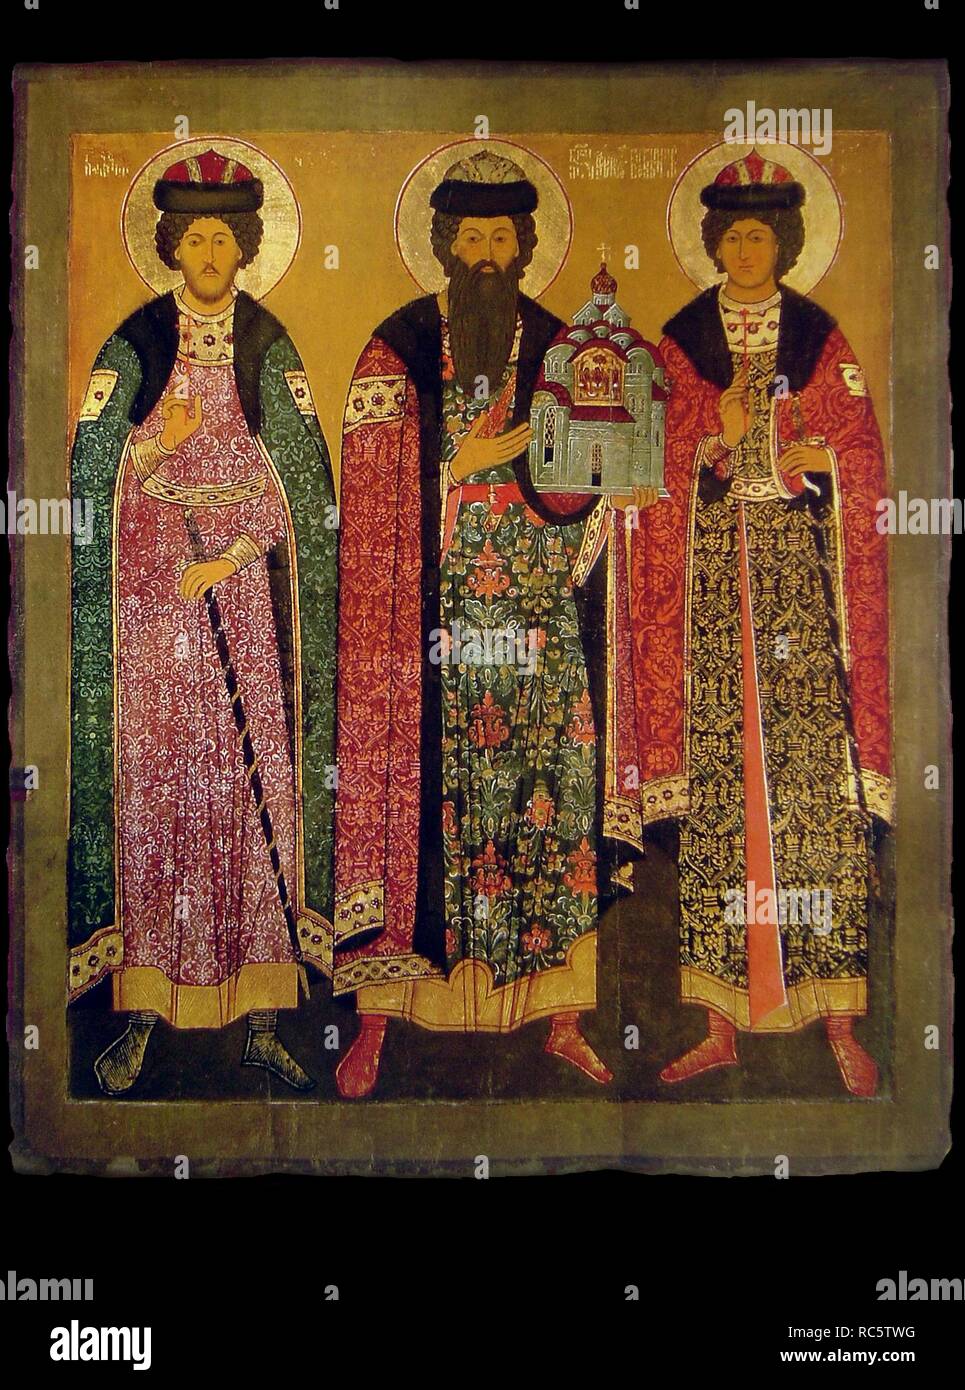 Saint Vsevolod Mstislavich, Prince of Pskov with Saints Boris and Gleb. Museum: State Open-air Museum of History, Architecture and Art, Pskov. Author: Russian icon. Stock Photo